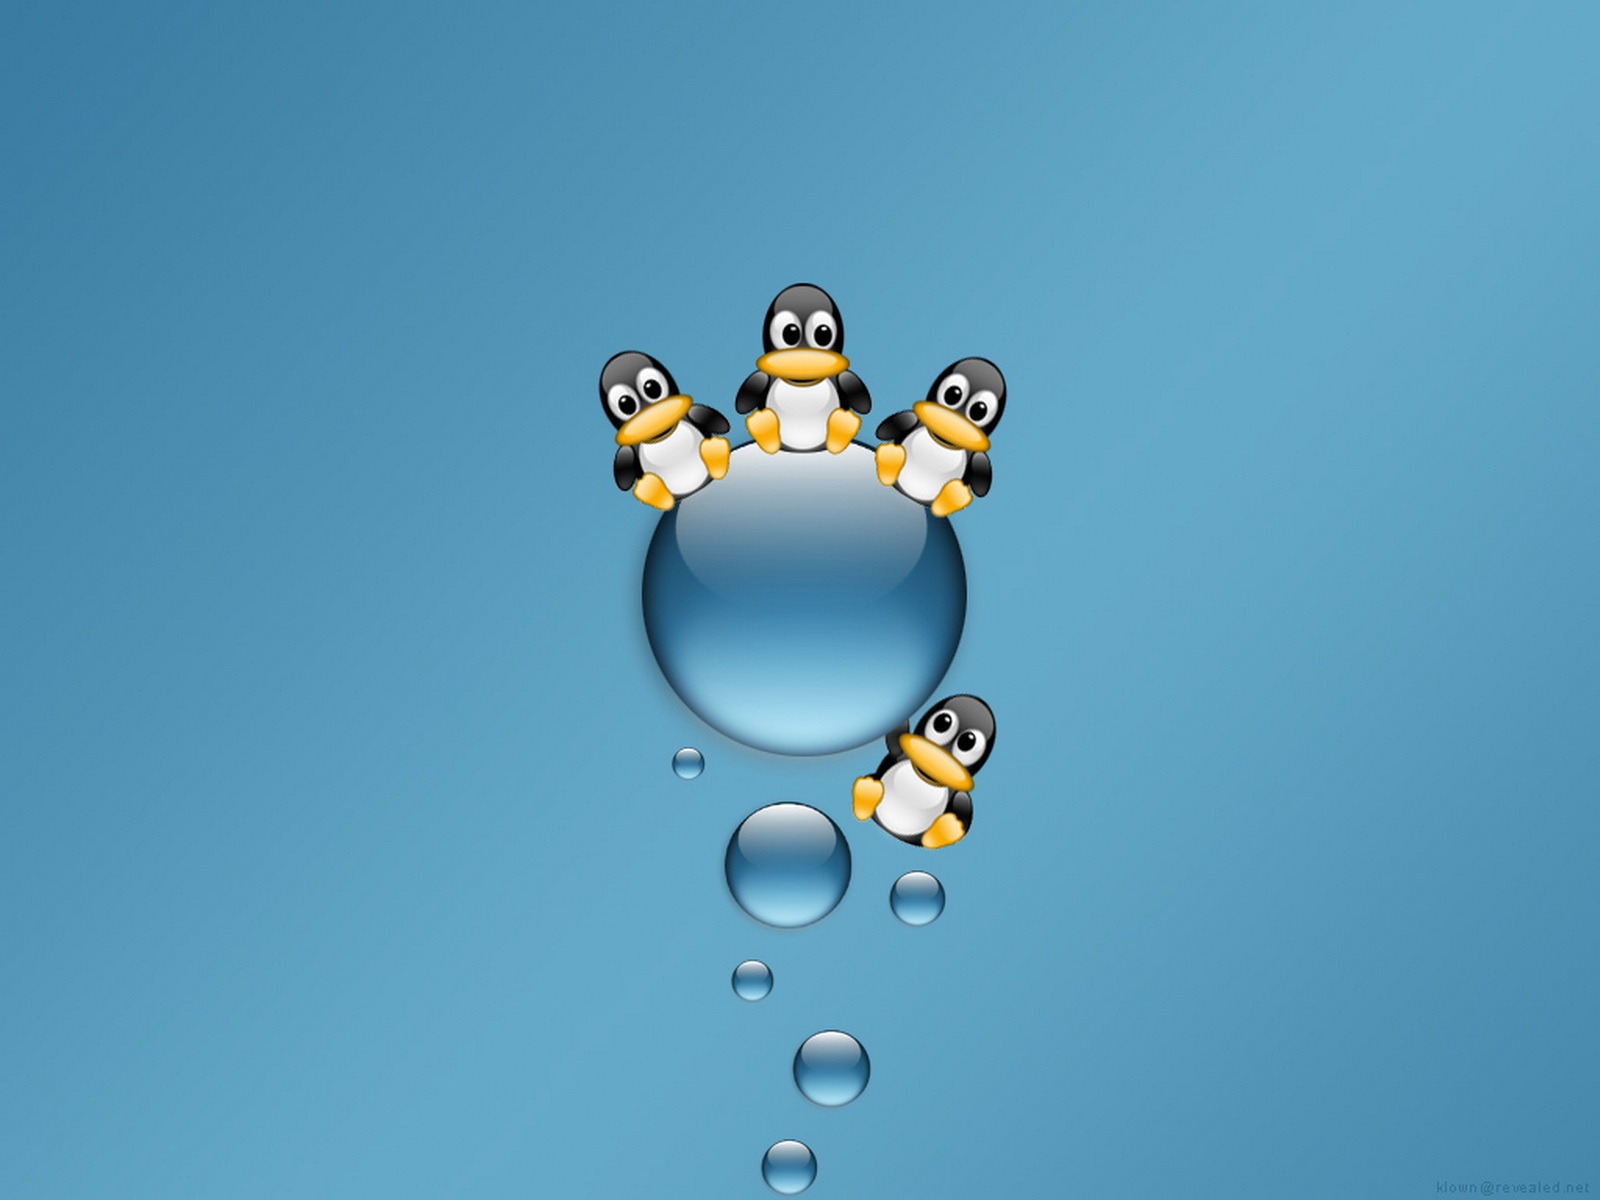 Linux tapety (2) #8 - 1600x1200